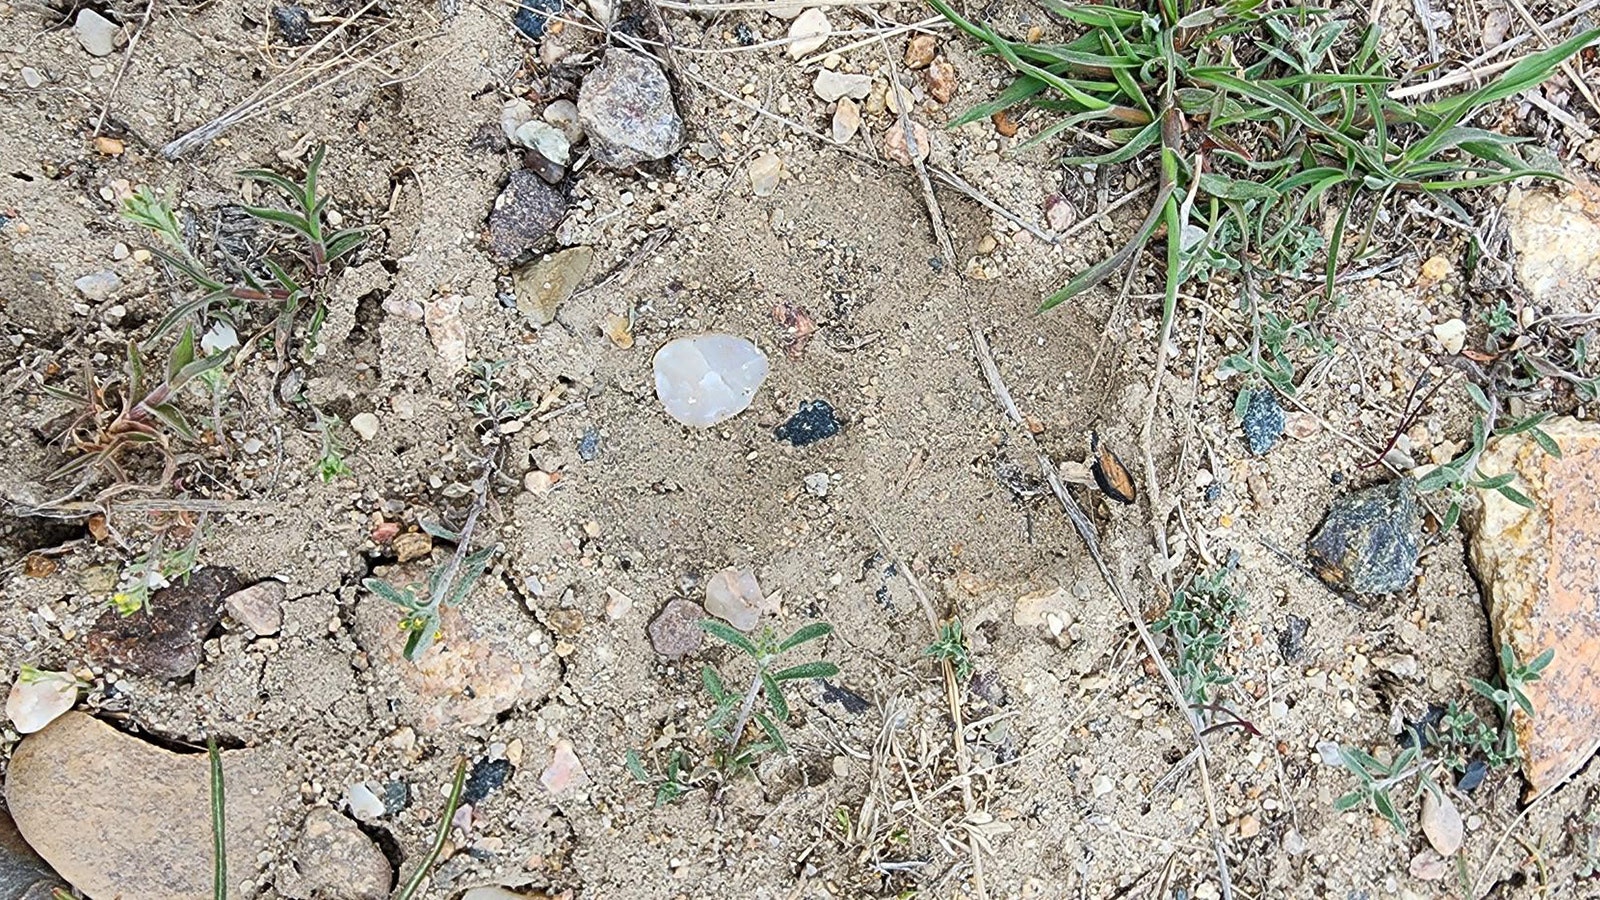 A large mountain lion has apparently been stalking the area around the Veterans Bridge in Evansville and stashing big game carcasses there. The police department is on the case, but so far the only solid evidence they’ve found is the beast’s tracks.